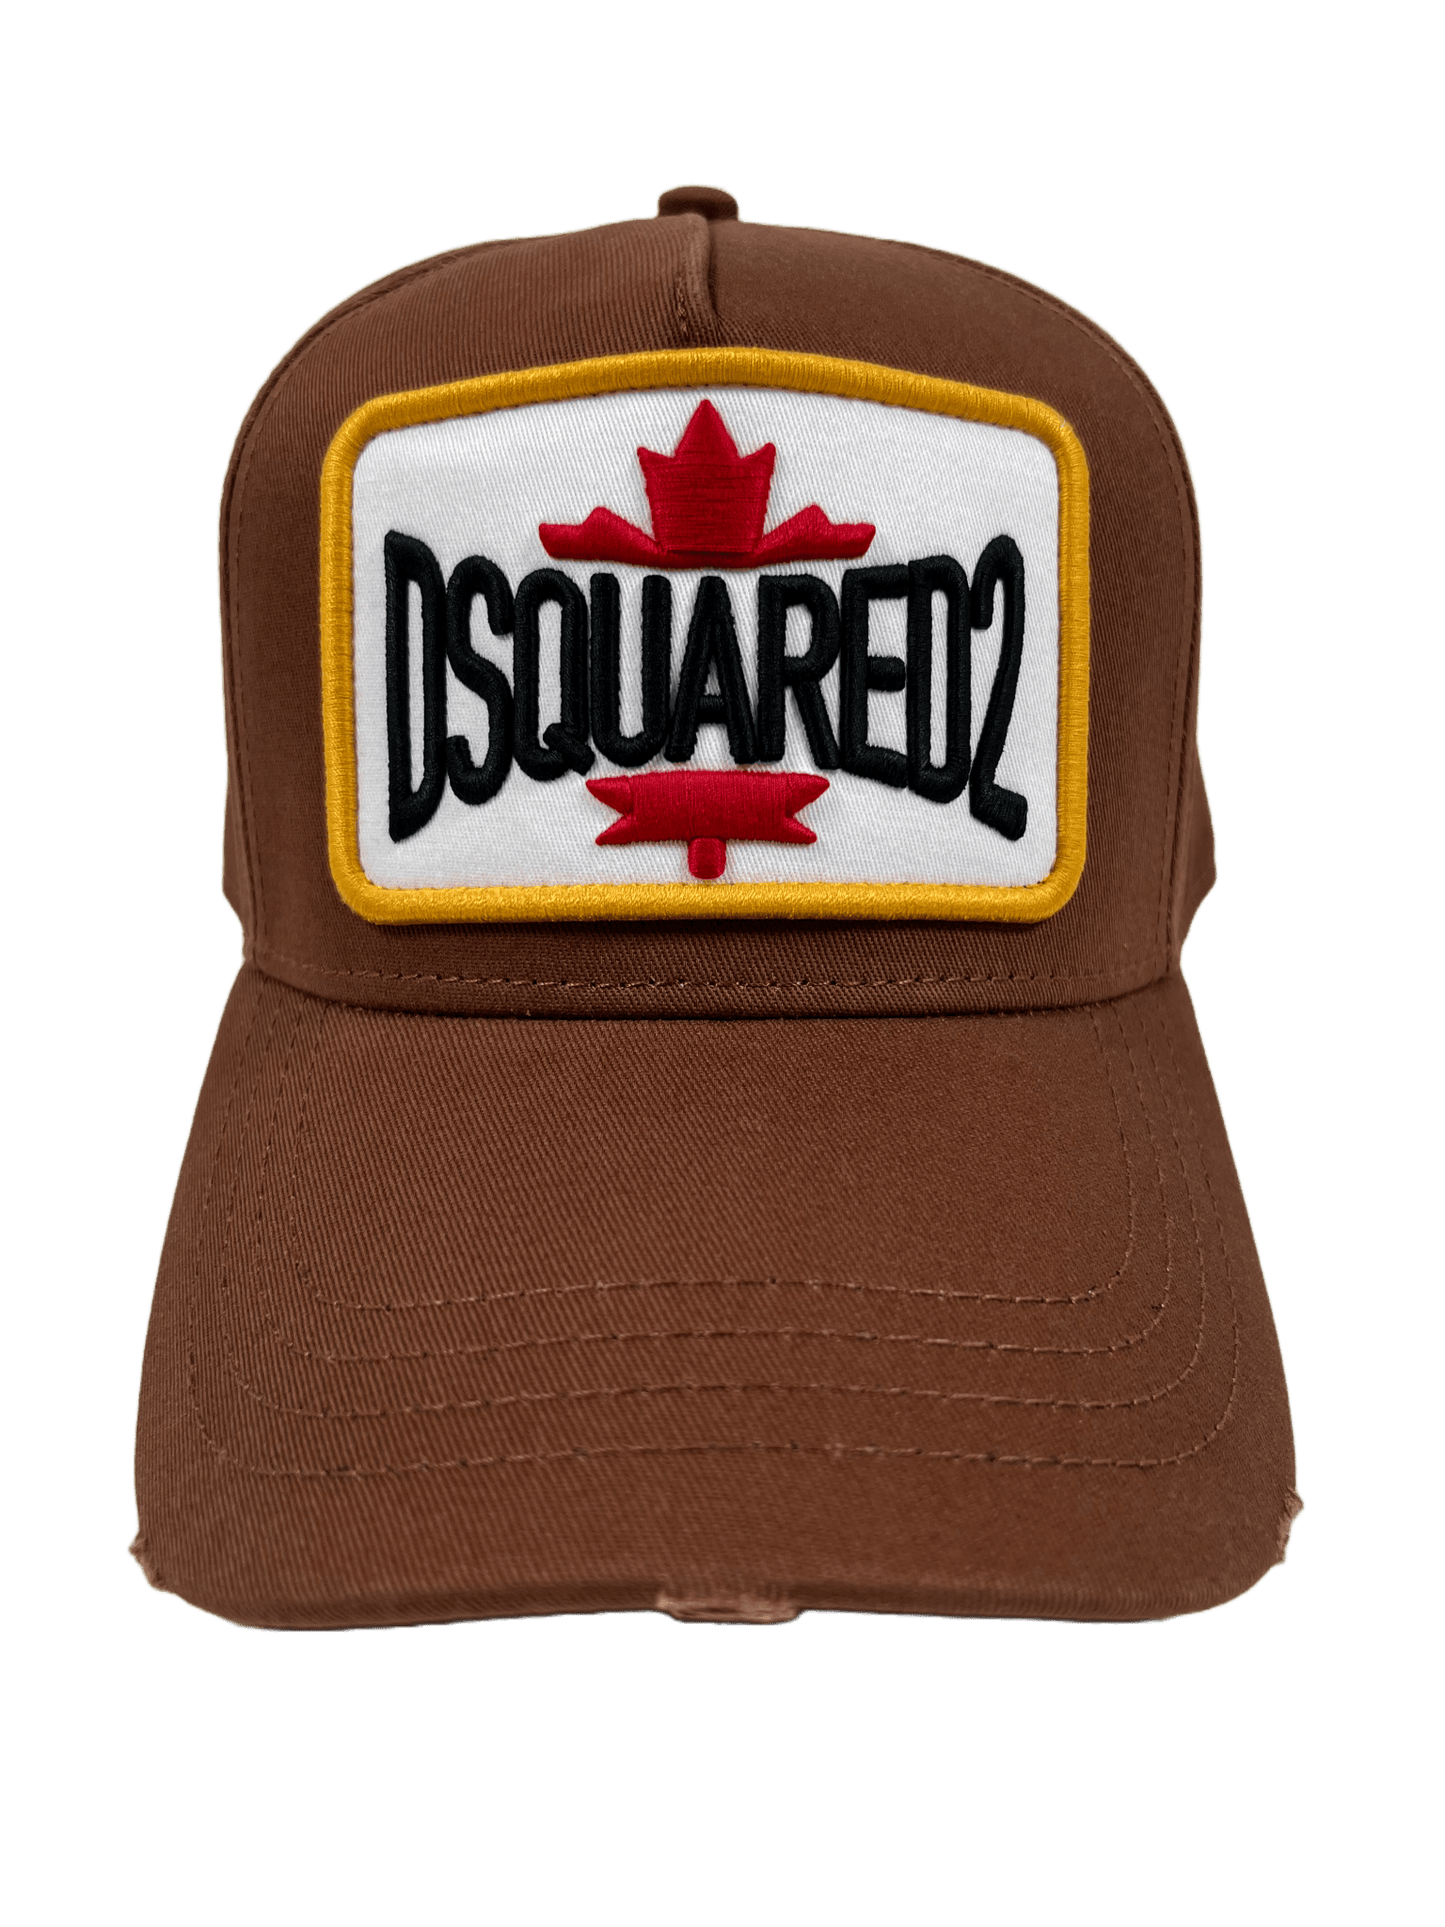 A brown DSQUARED2 BCM0611 BASEBALL CAP GABARDINE-NOCCIOLA embroidered with the word DSQUARED2 on it.